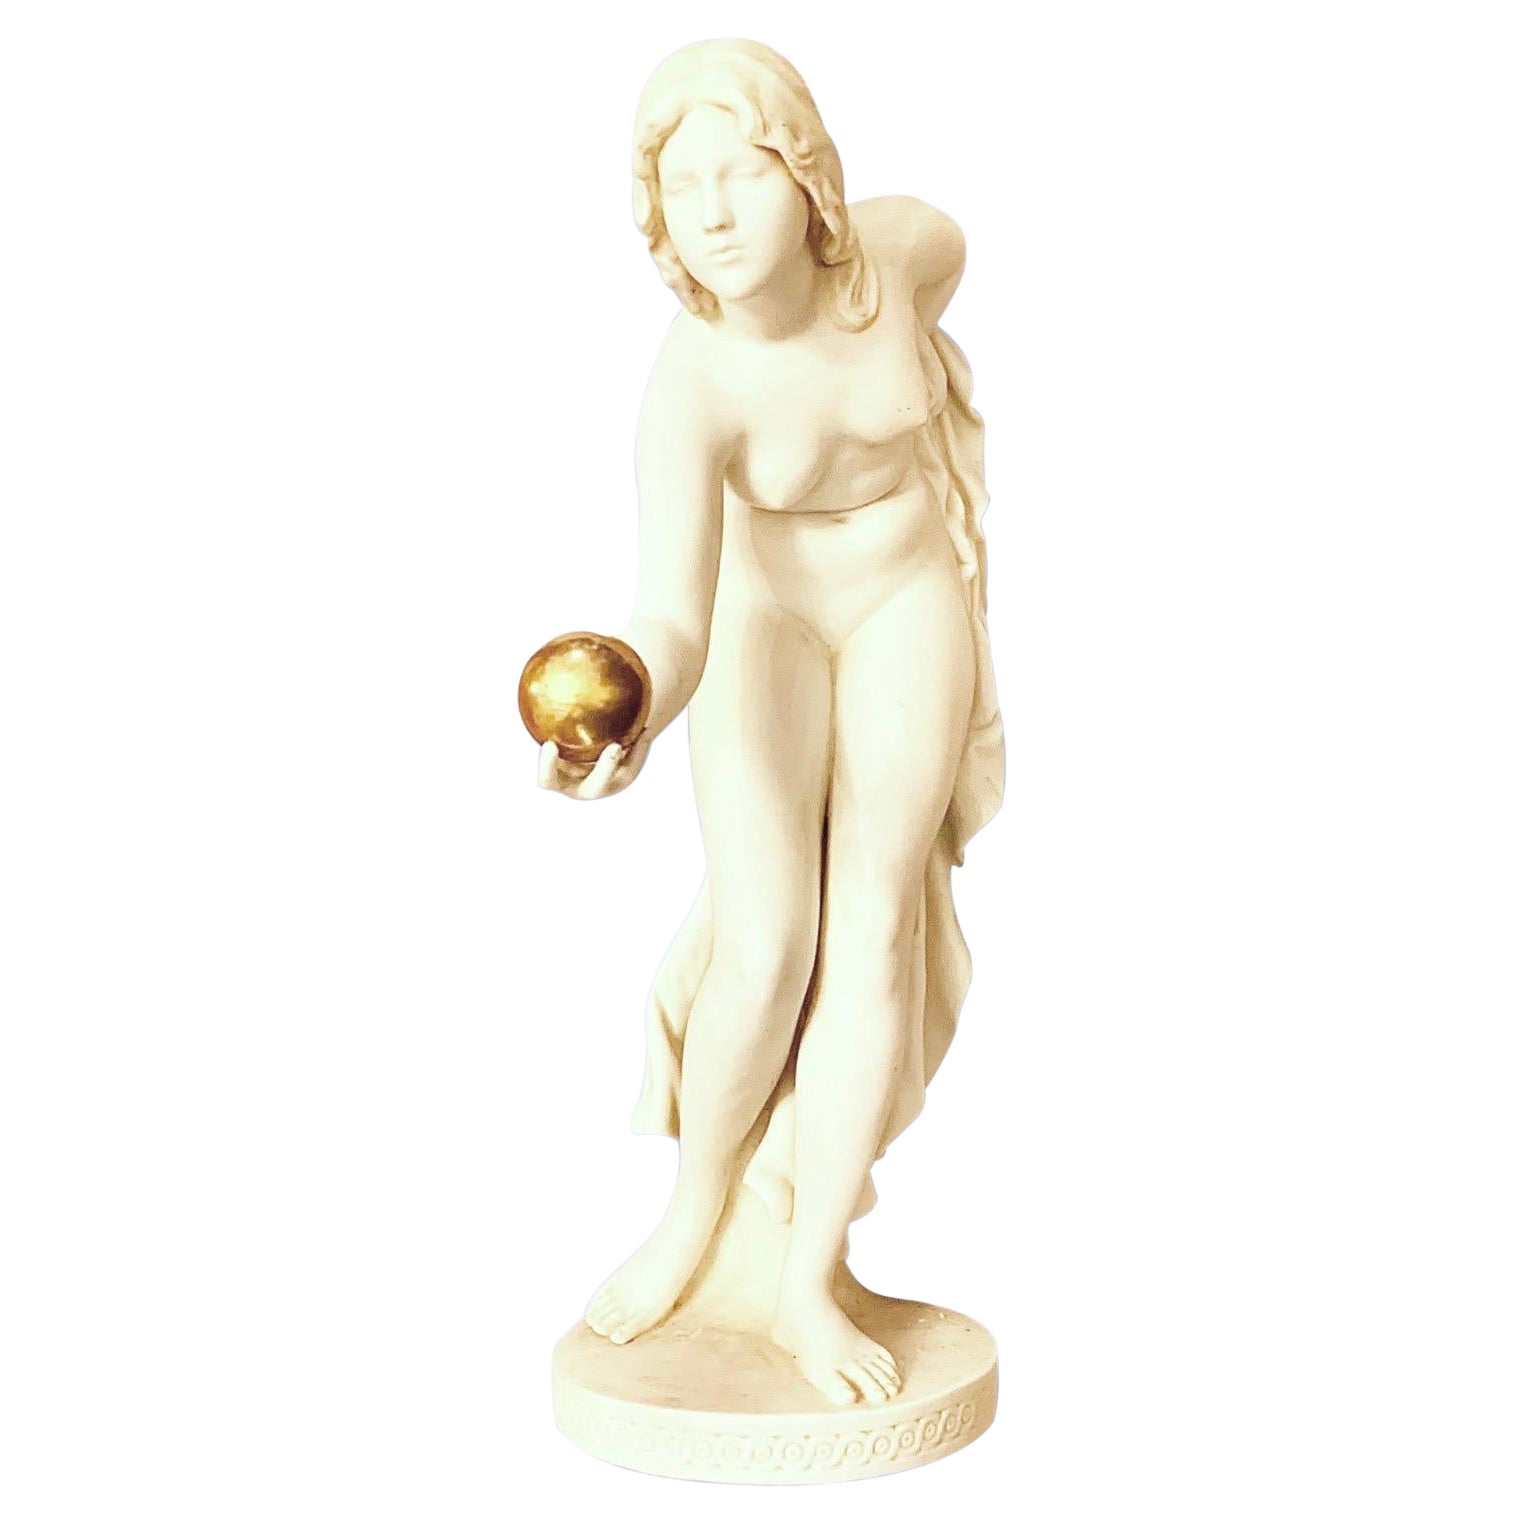 Antique Early 20th C Parian Figure, Woman with Gold Ball